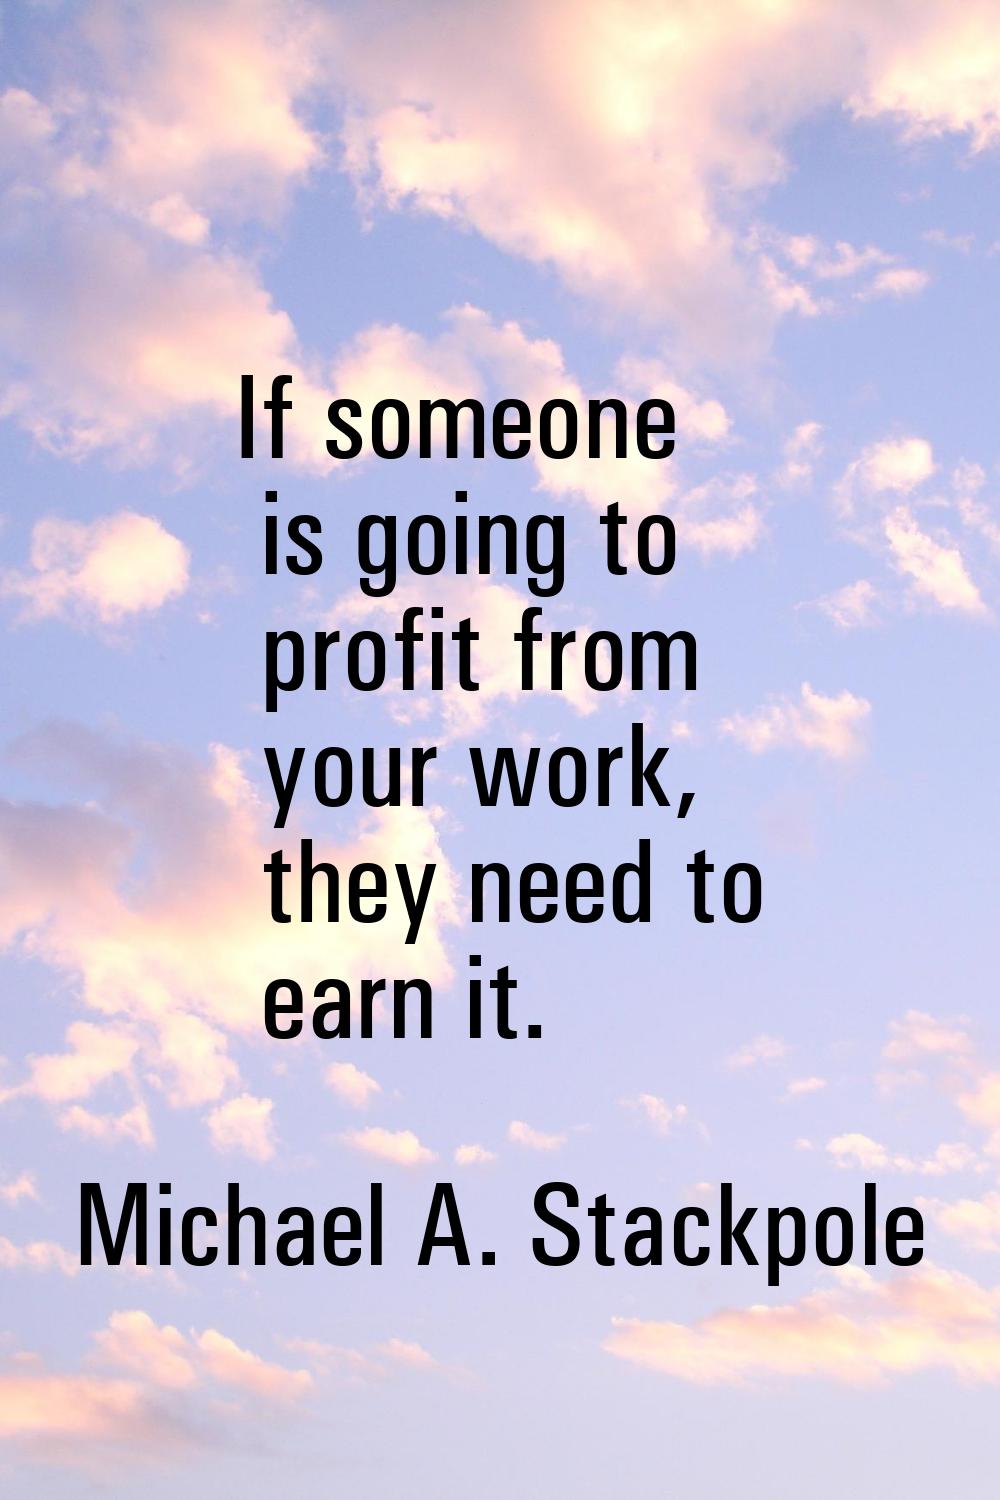 If someone is going to profit from your work, they need to earn it.